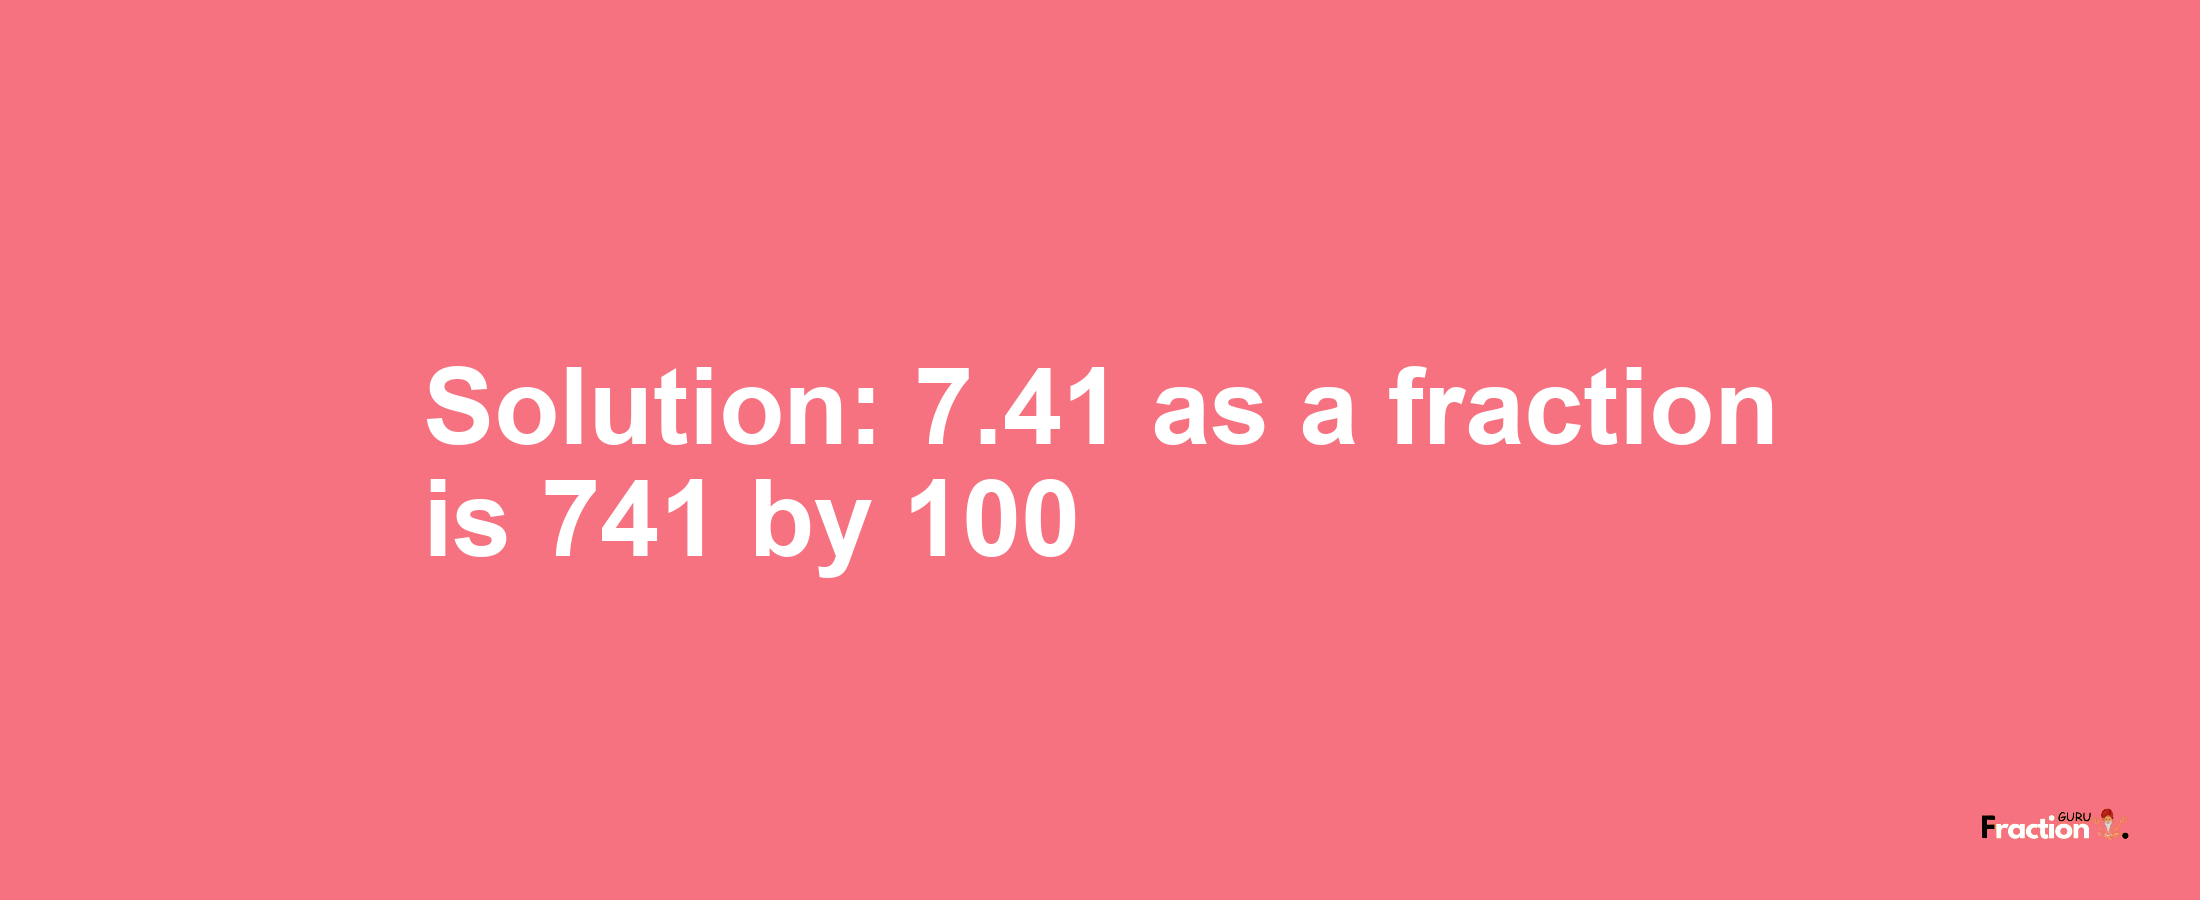 Solution:7.41 as a fraction is 741/100